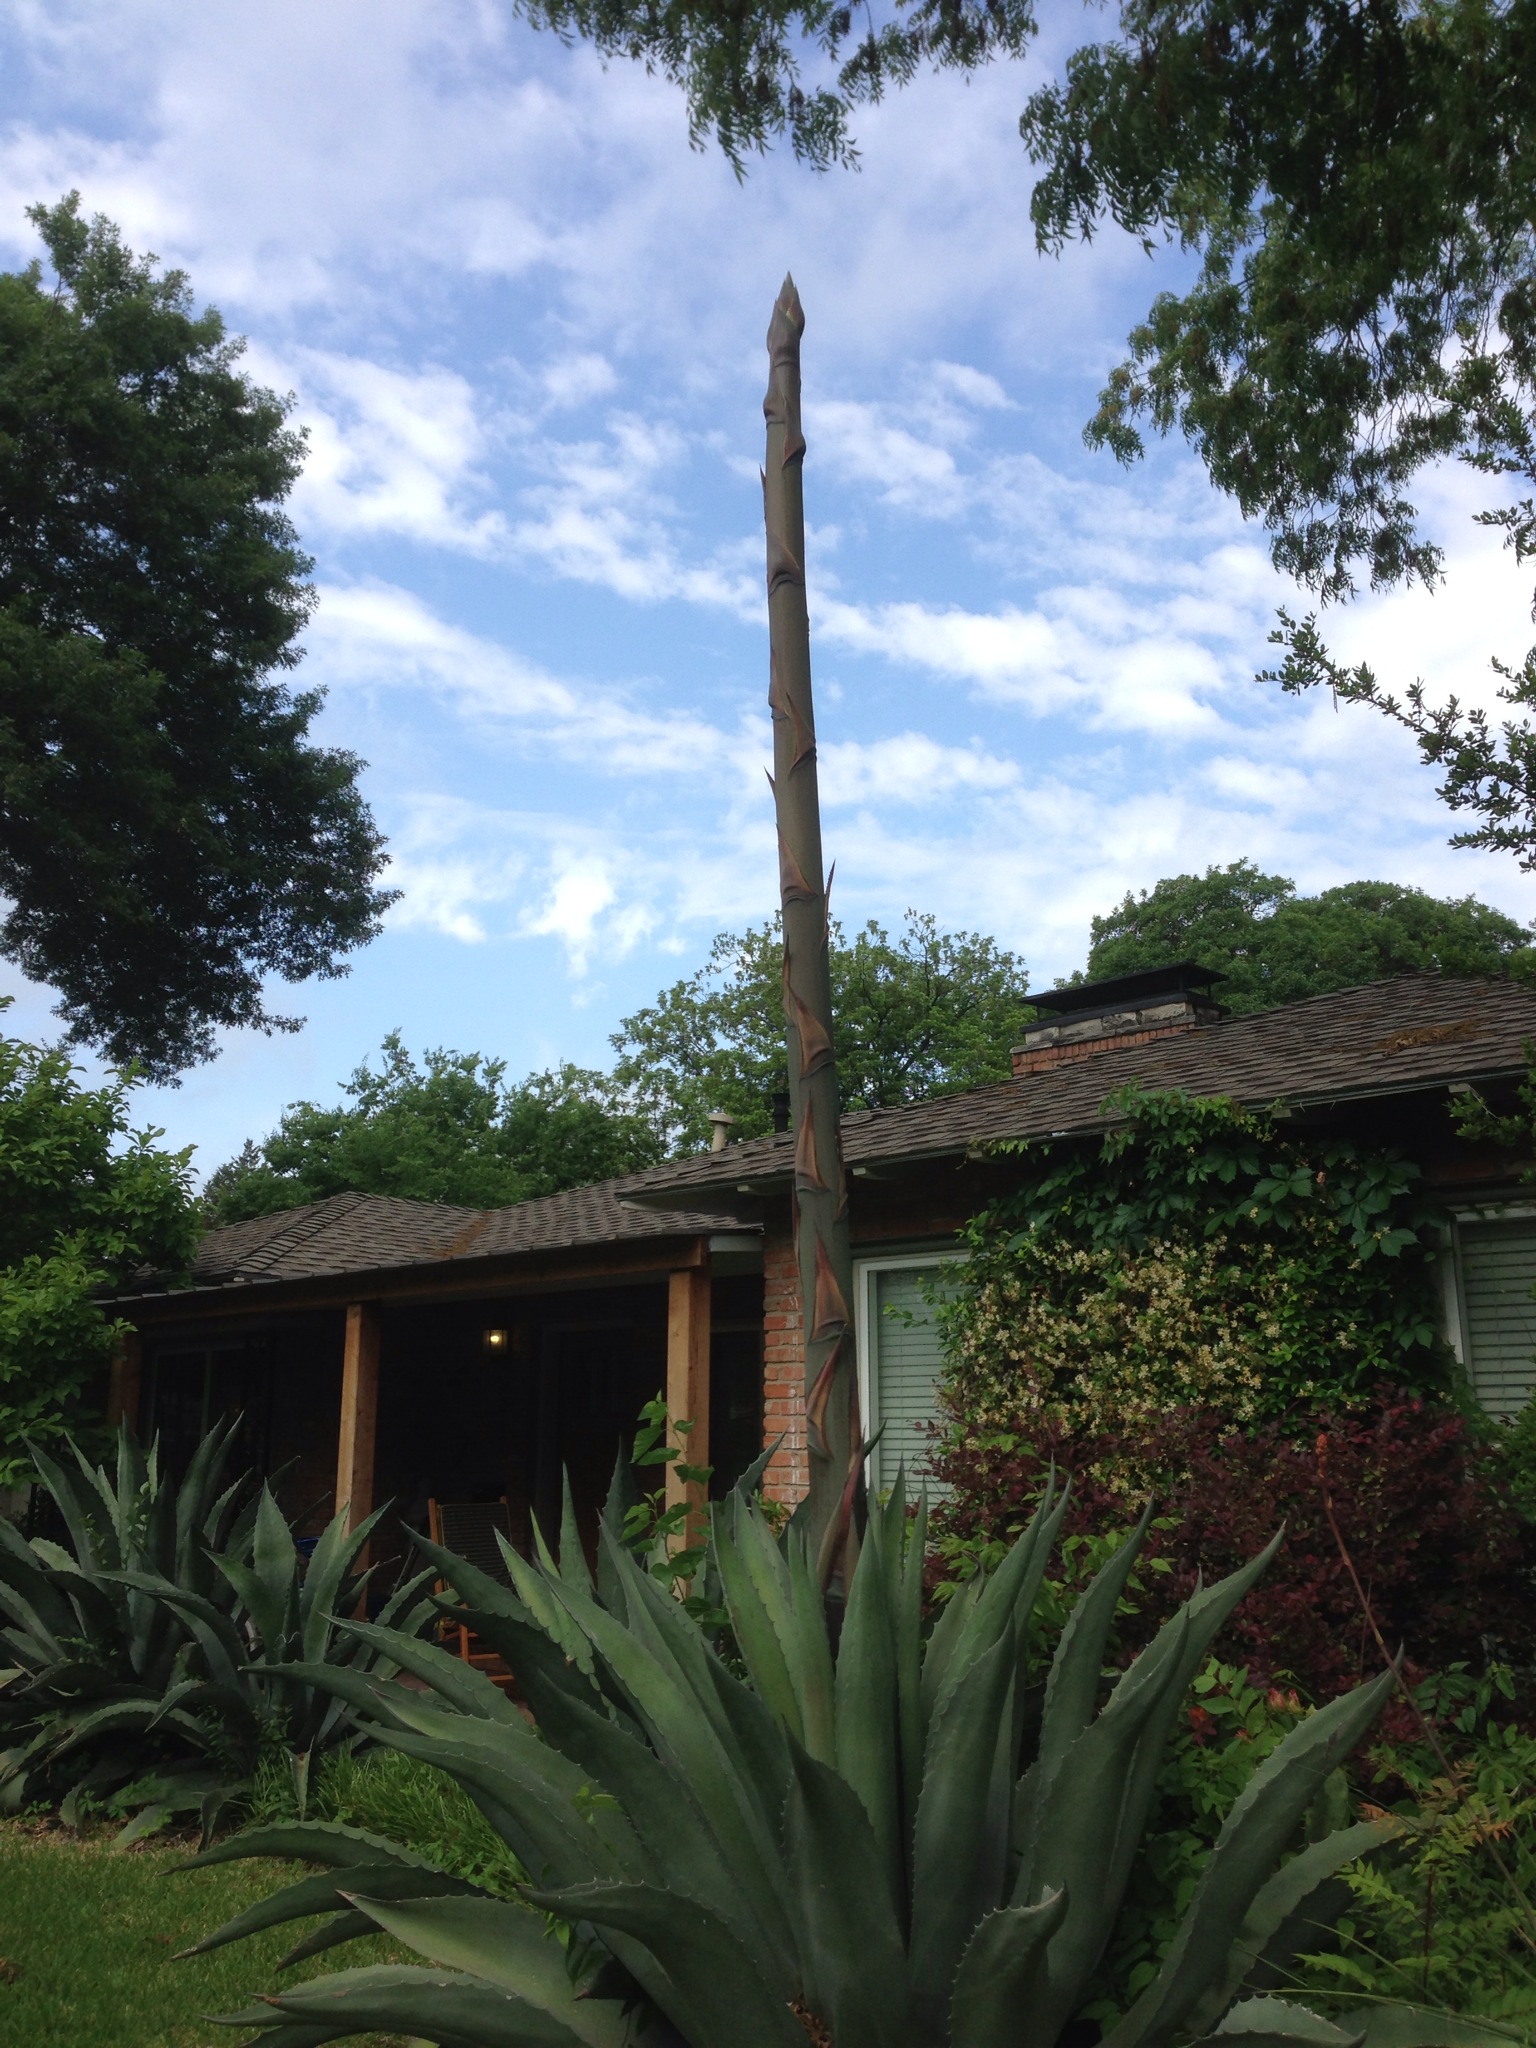 Agave Plant In Forest Hills Prepares To Bloom After 15 20 Years Lakewood East Dallas,Baked Chicken Breast Dinner